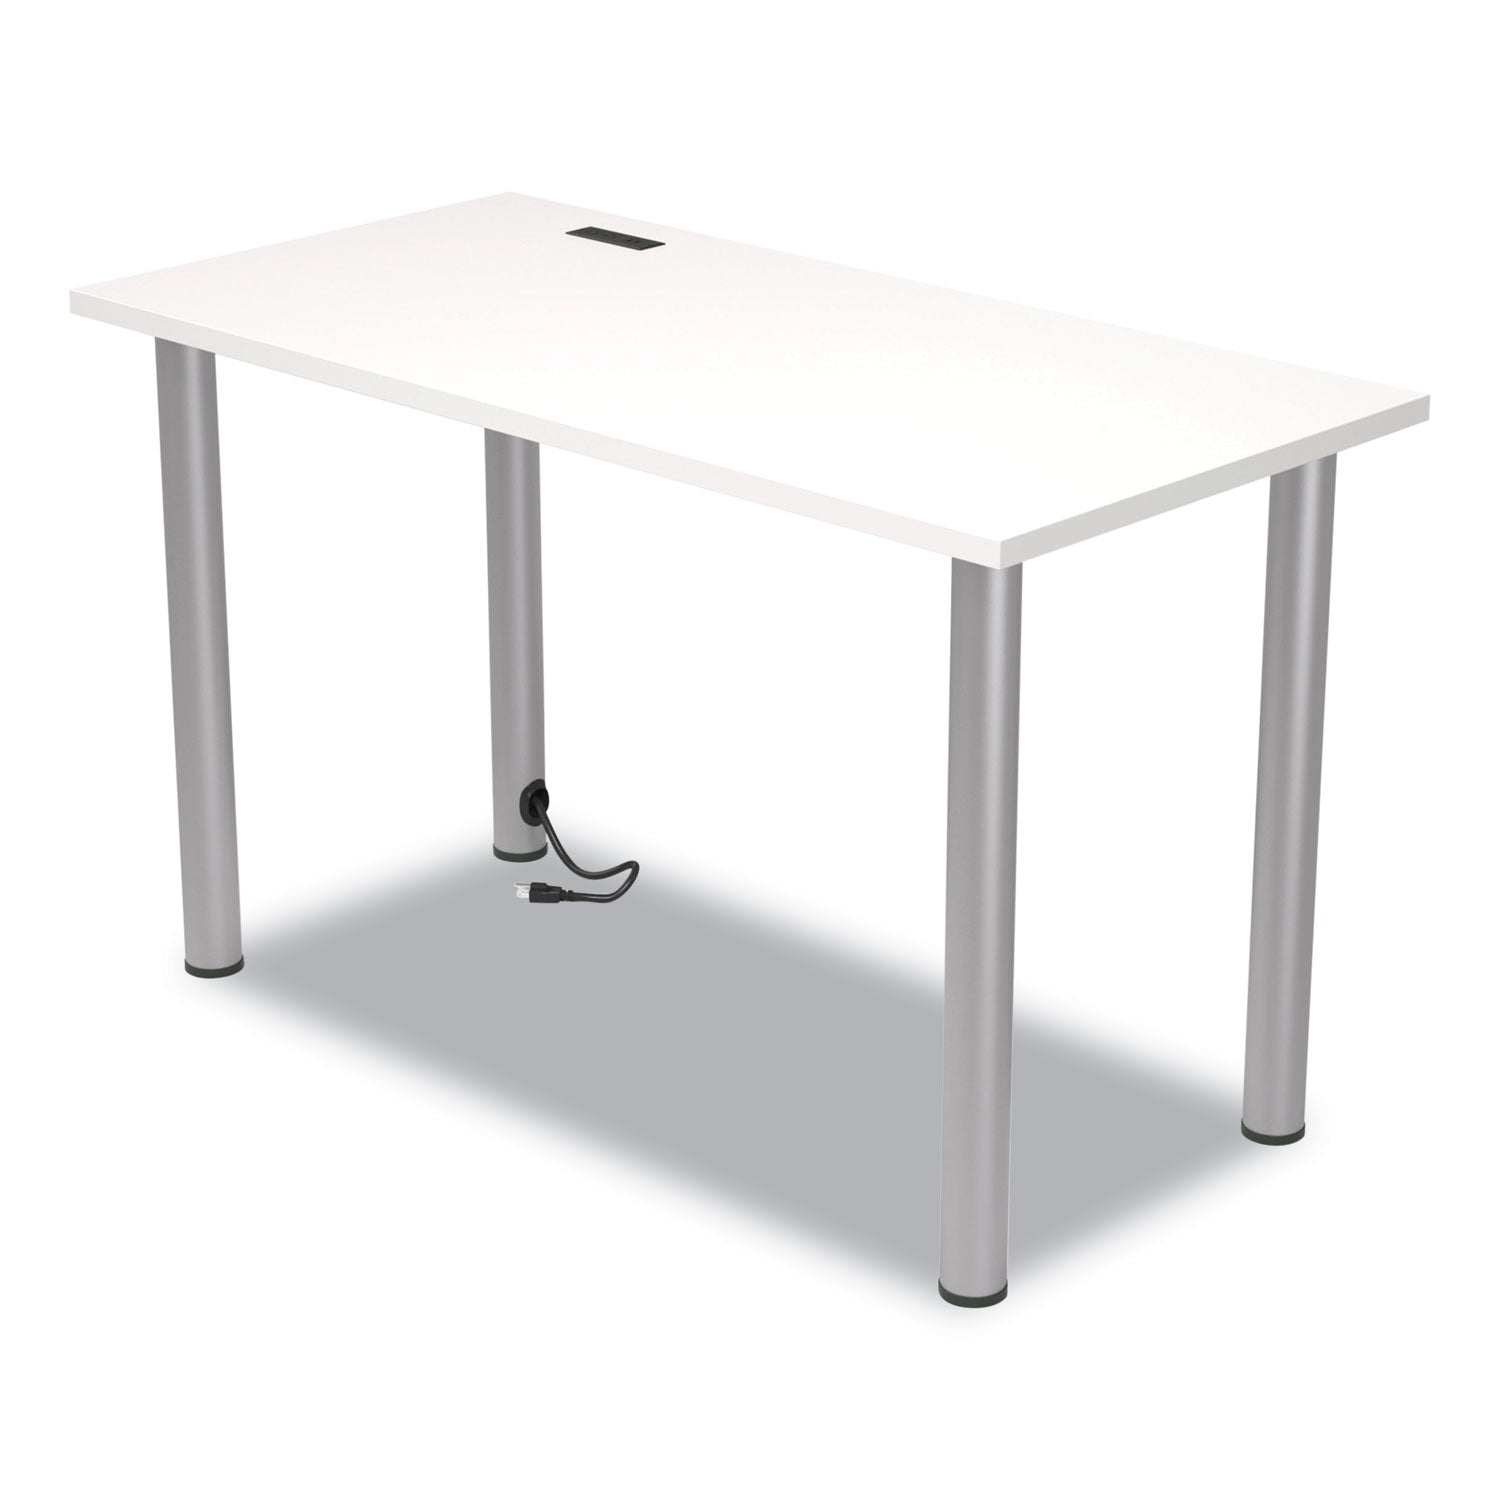 essentials-writing-table-desk-with-integrated-power-management-475-x-237-x-288-white-aluminum_uos24398970 - 3